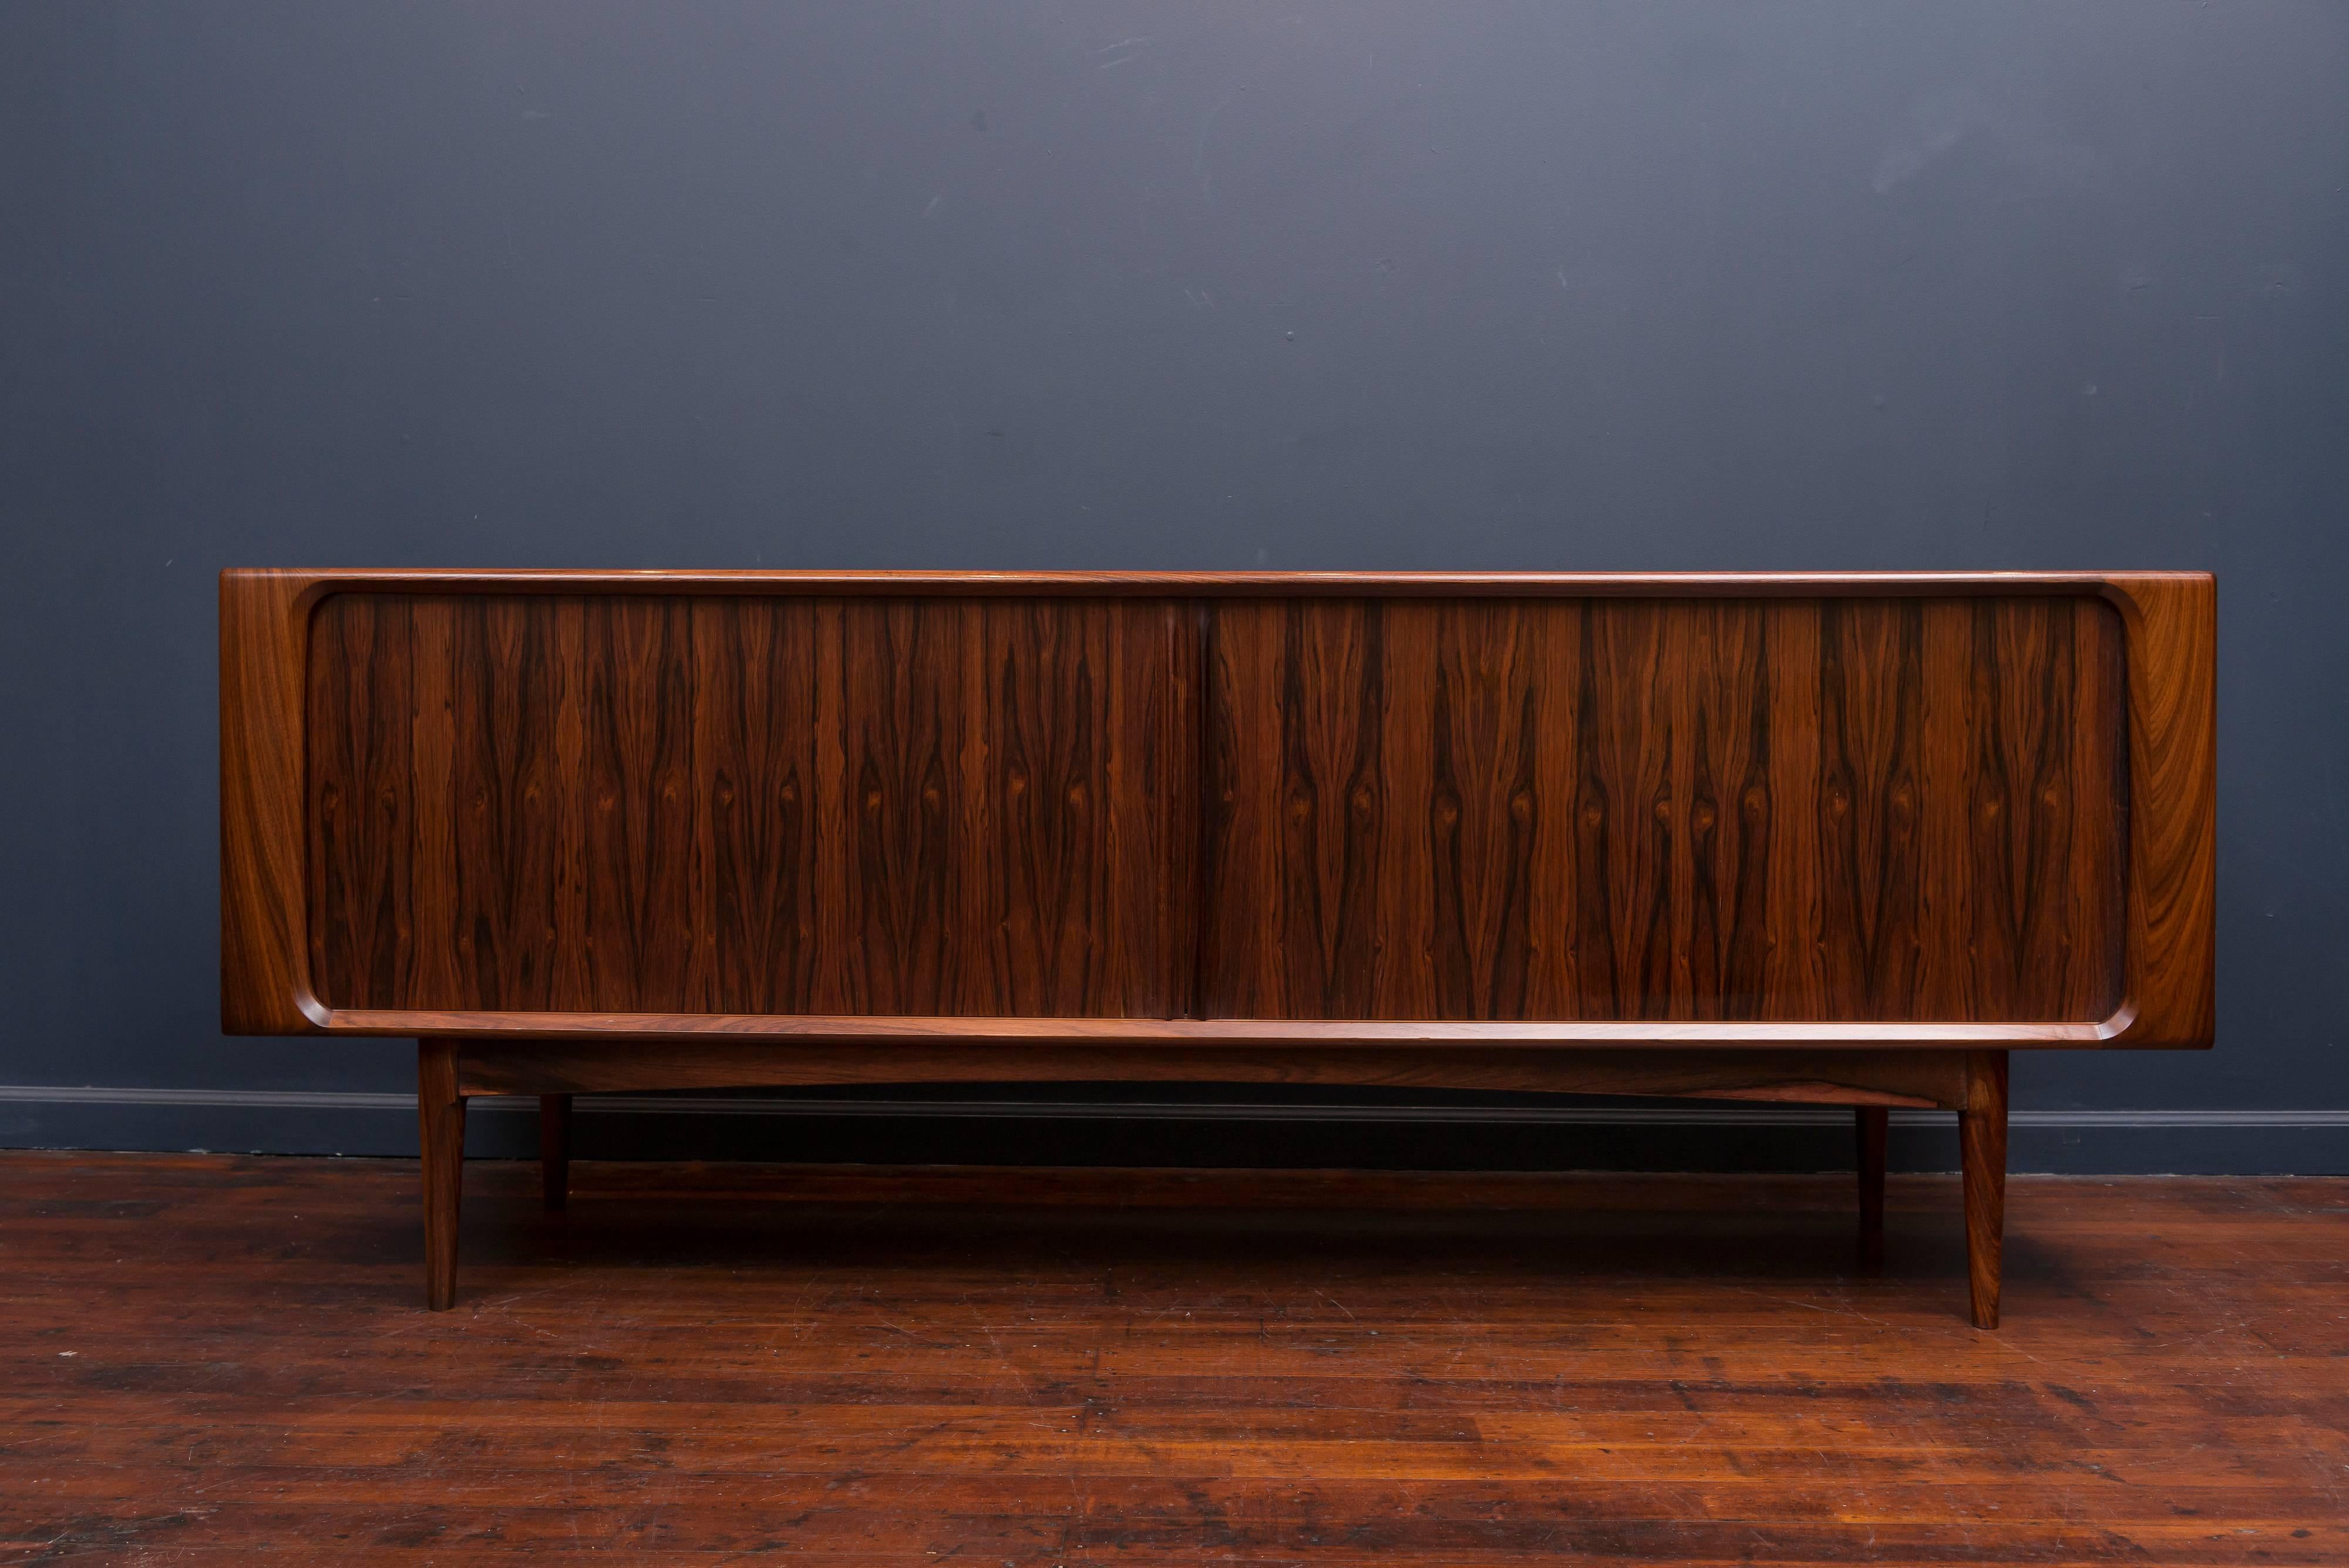 Exceptional quality design tambour door credenza with highly figured rosewood grains throughout and a fitted interior.